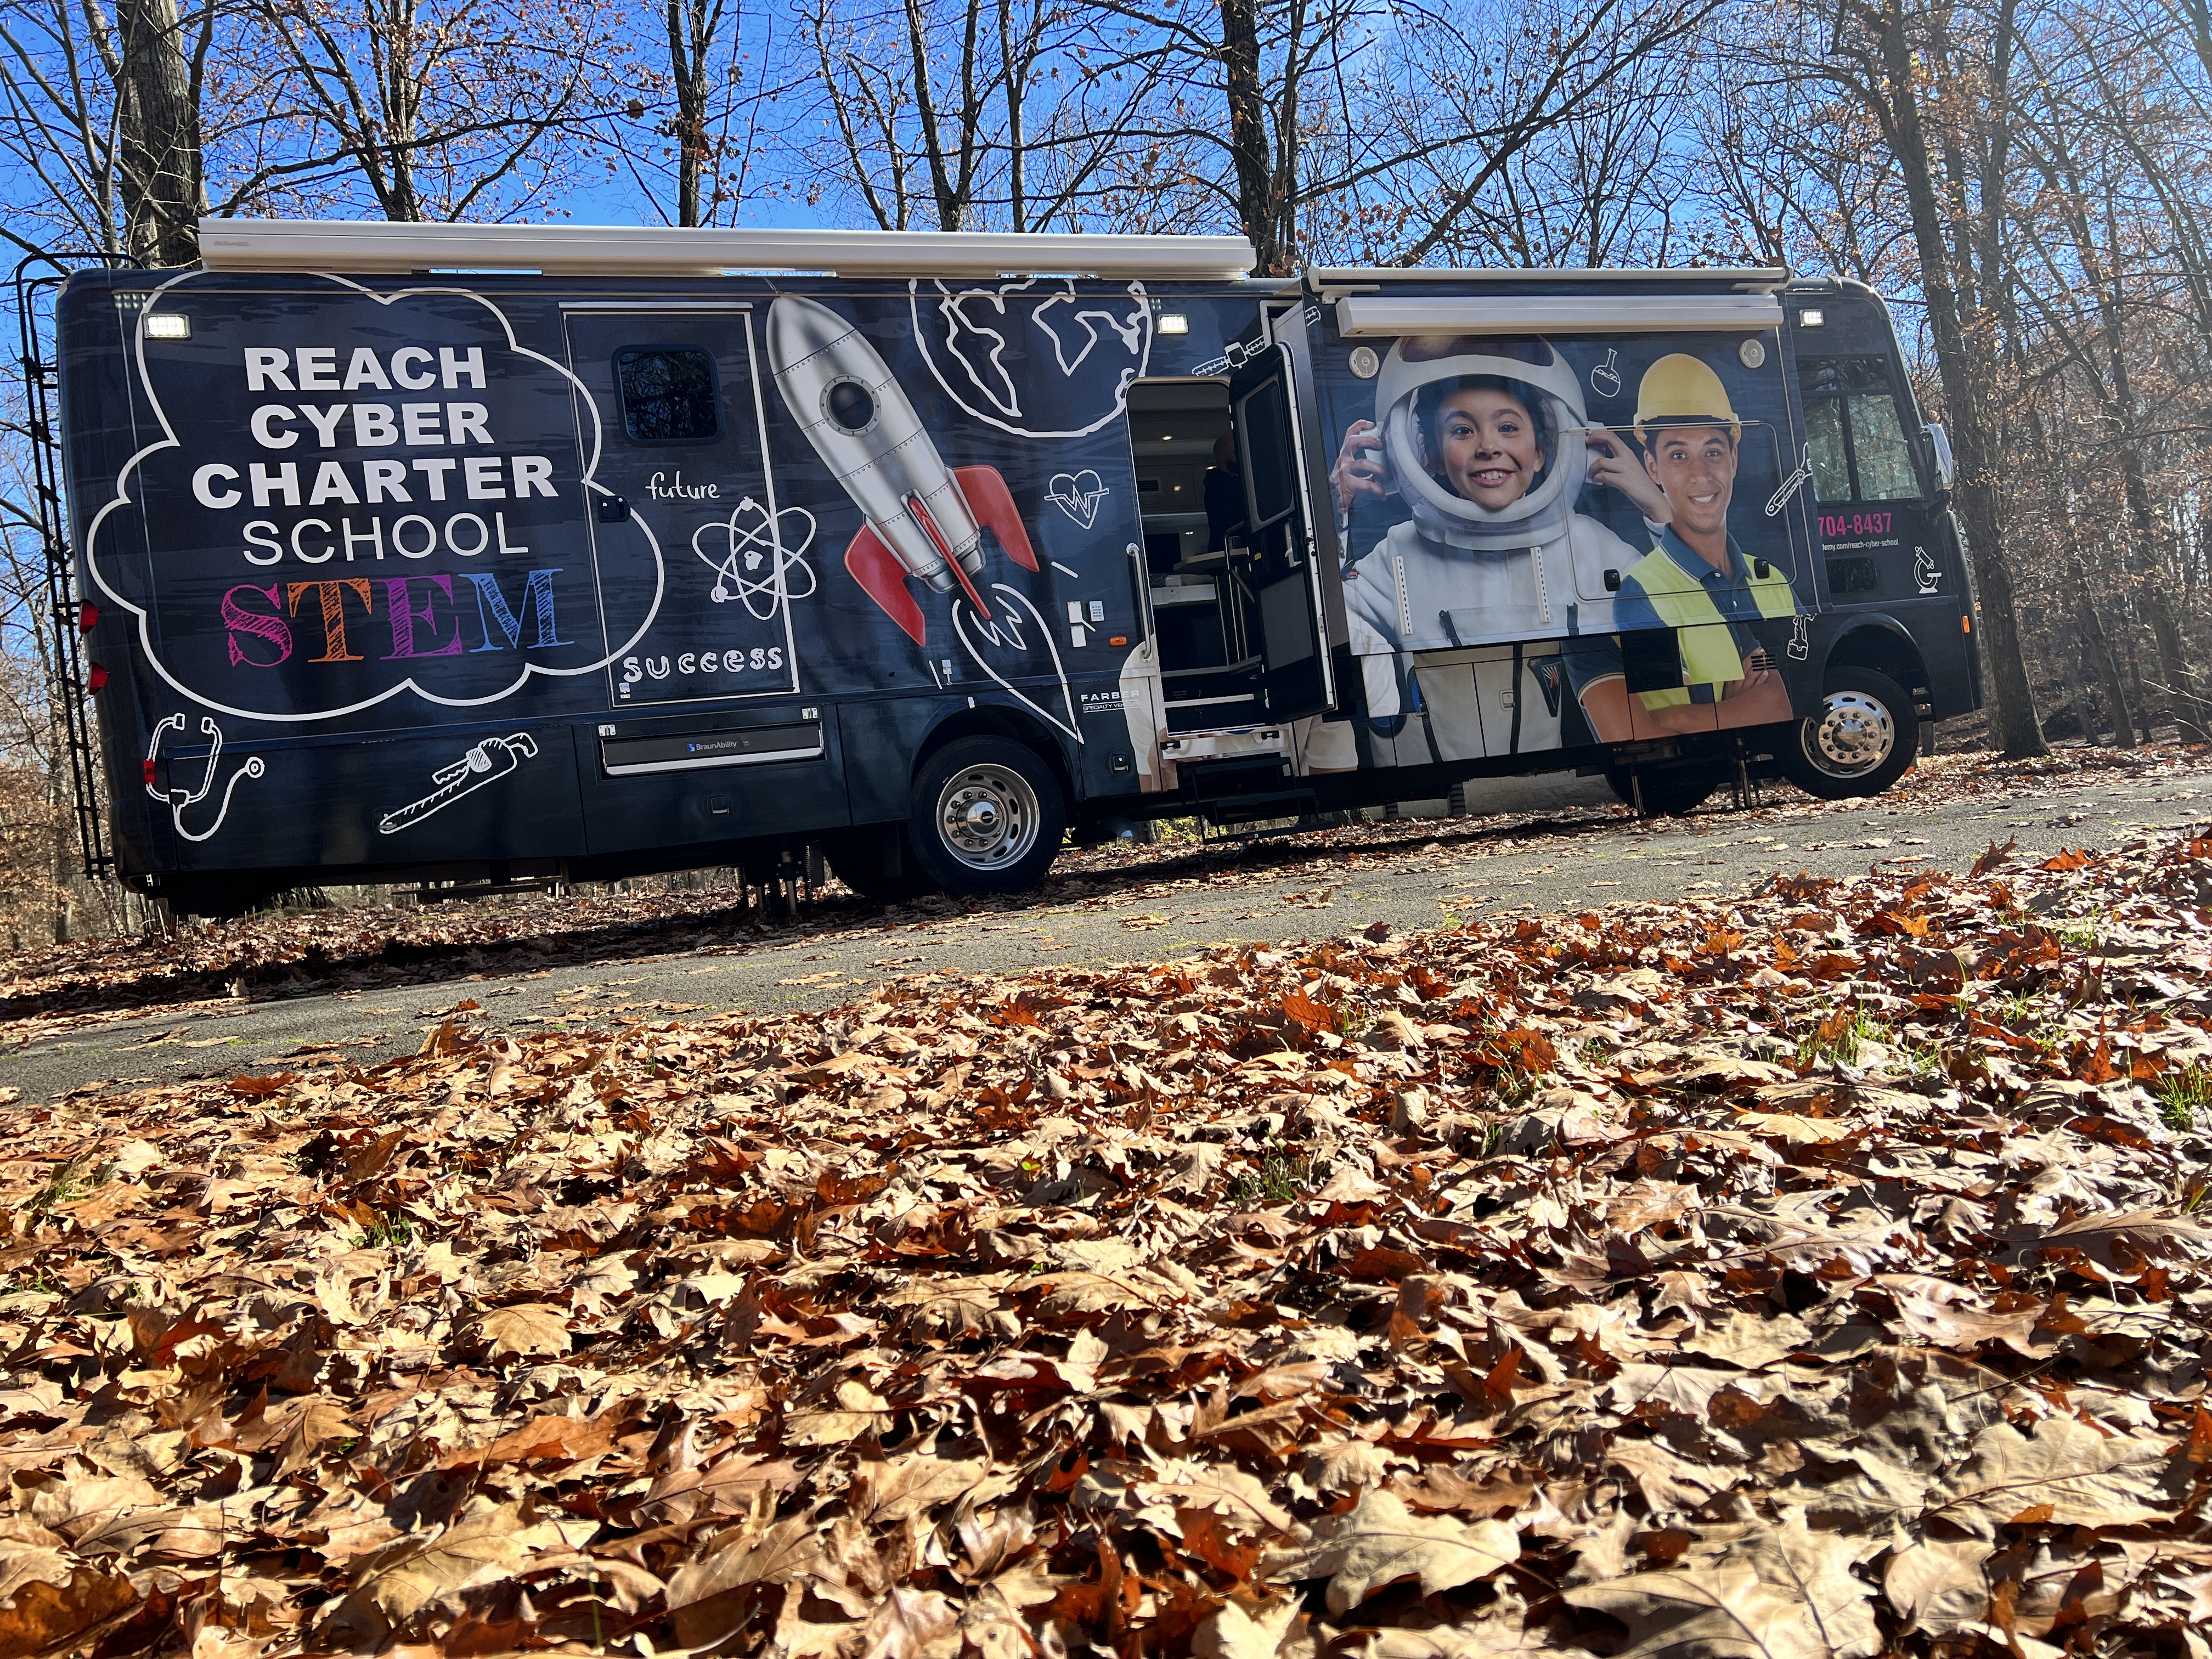 The Reach Cyber STEM bus parked on a road in the middle of a forest.